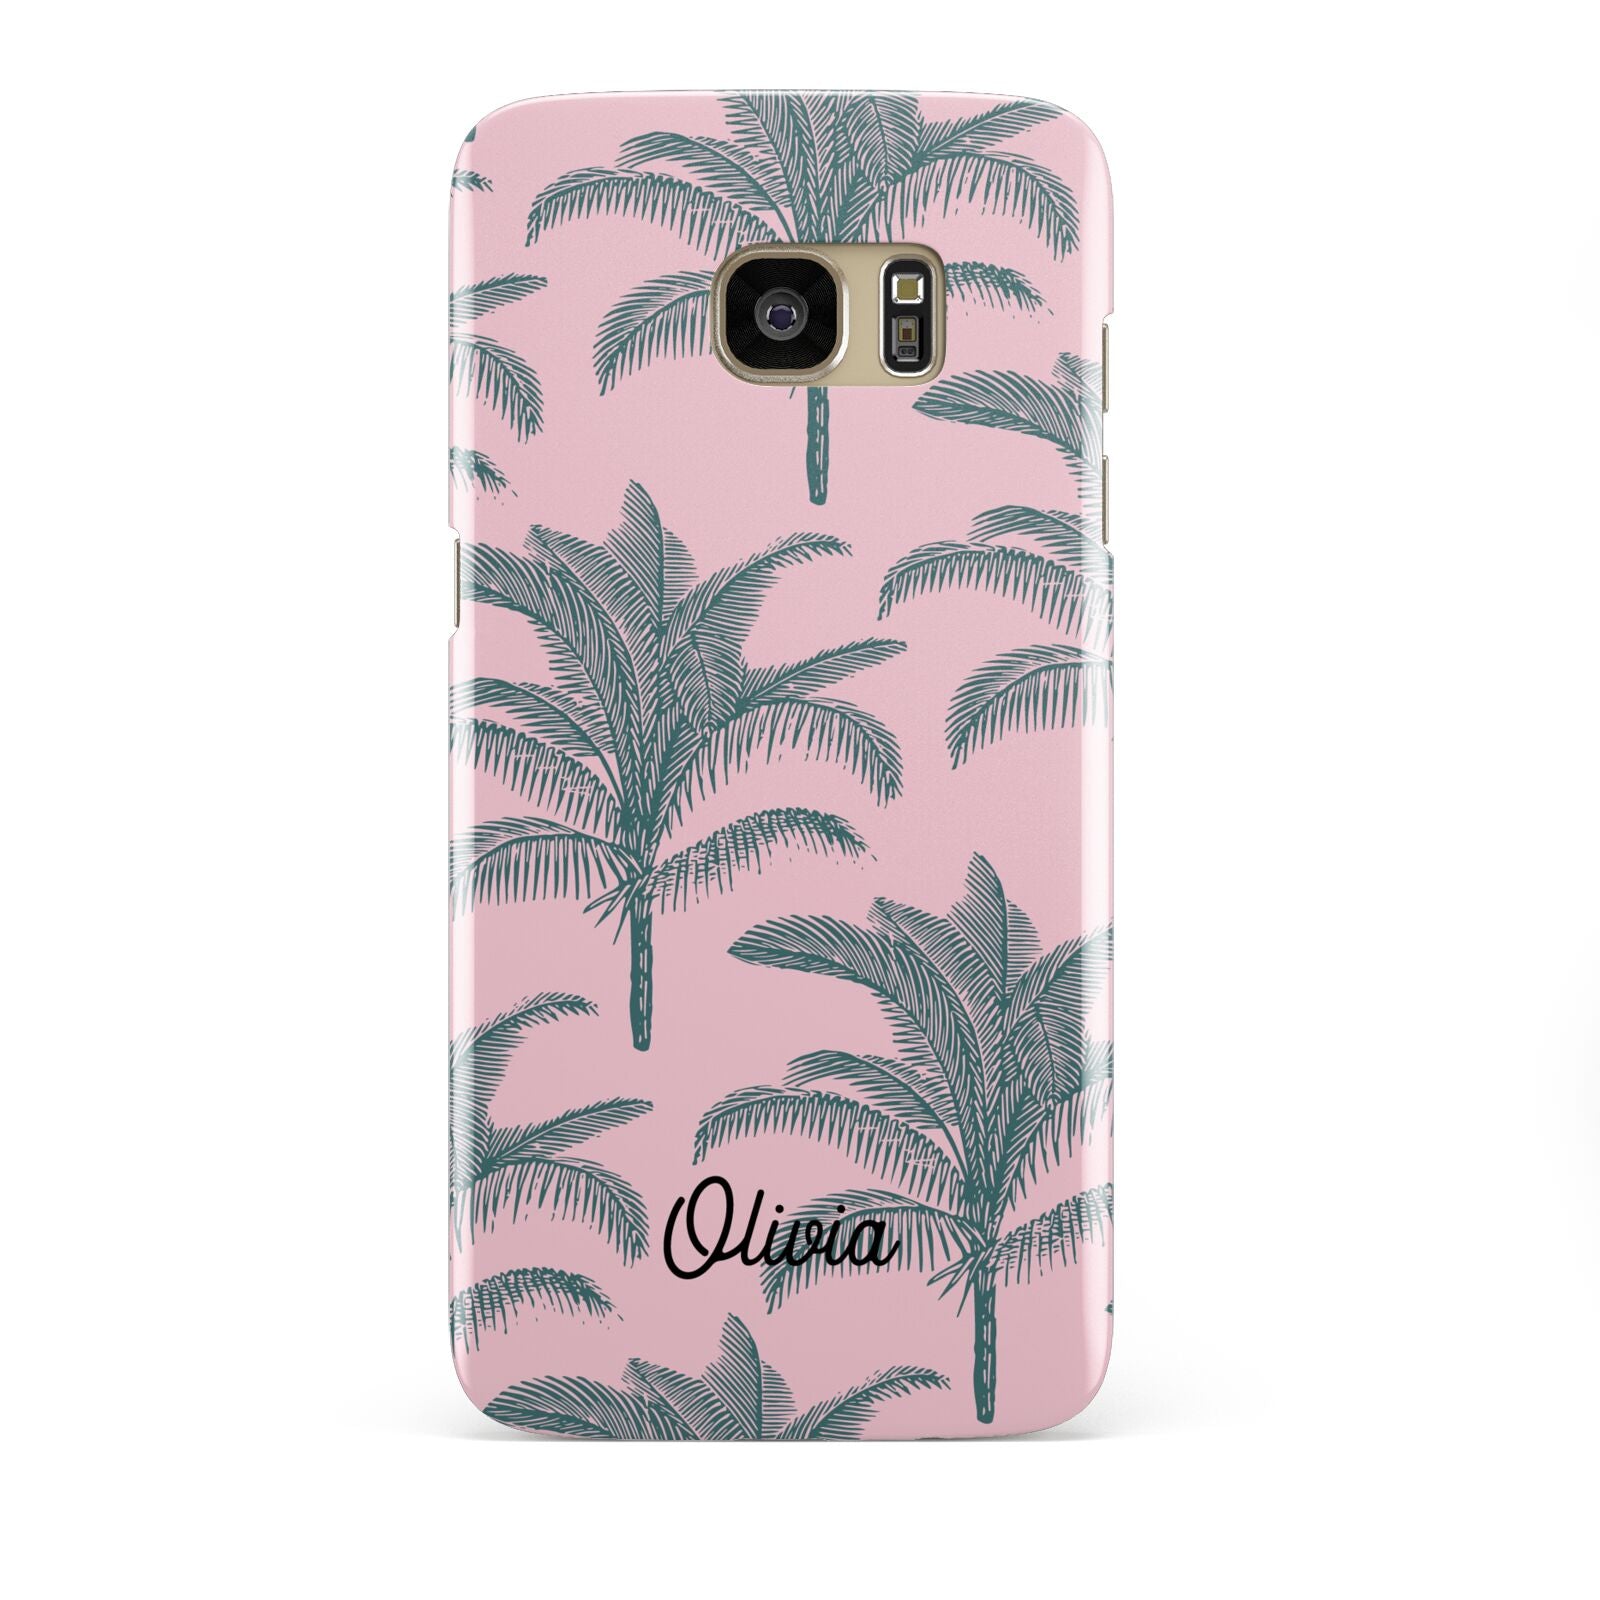 Personalised Palm Samsung Galaxy S7 Edge Case